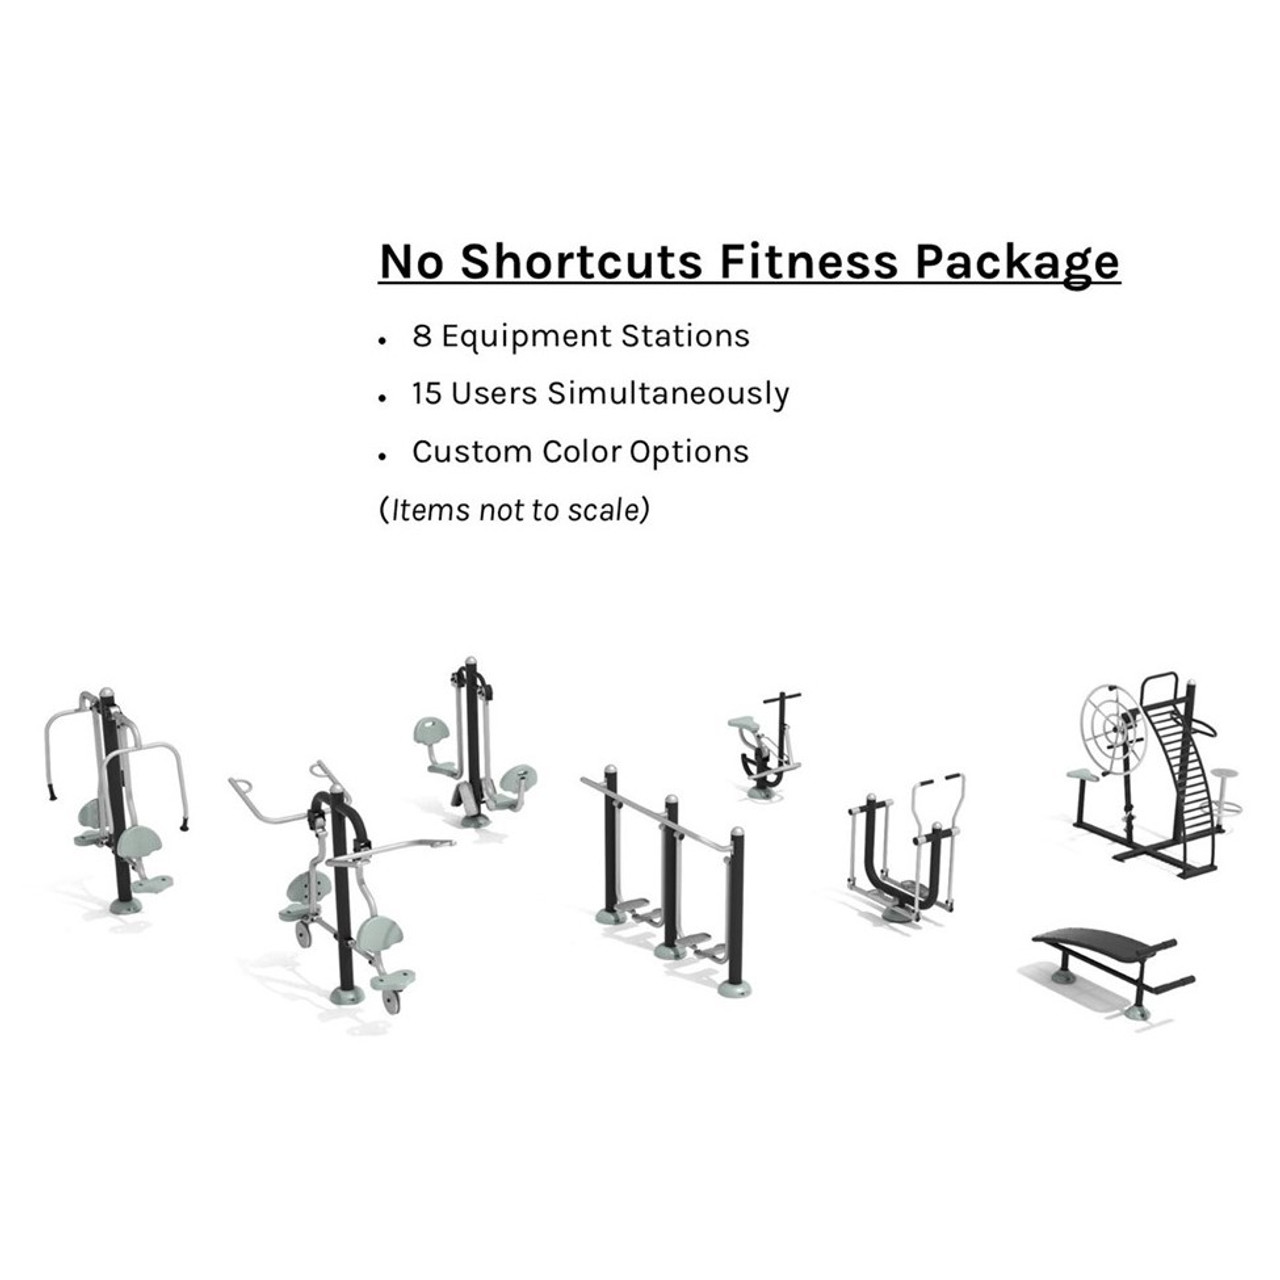 No Shortcuts Outdoor Fitness Package